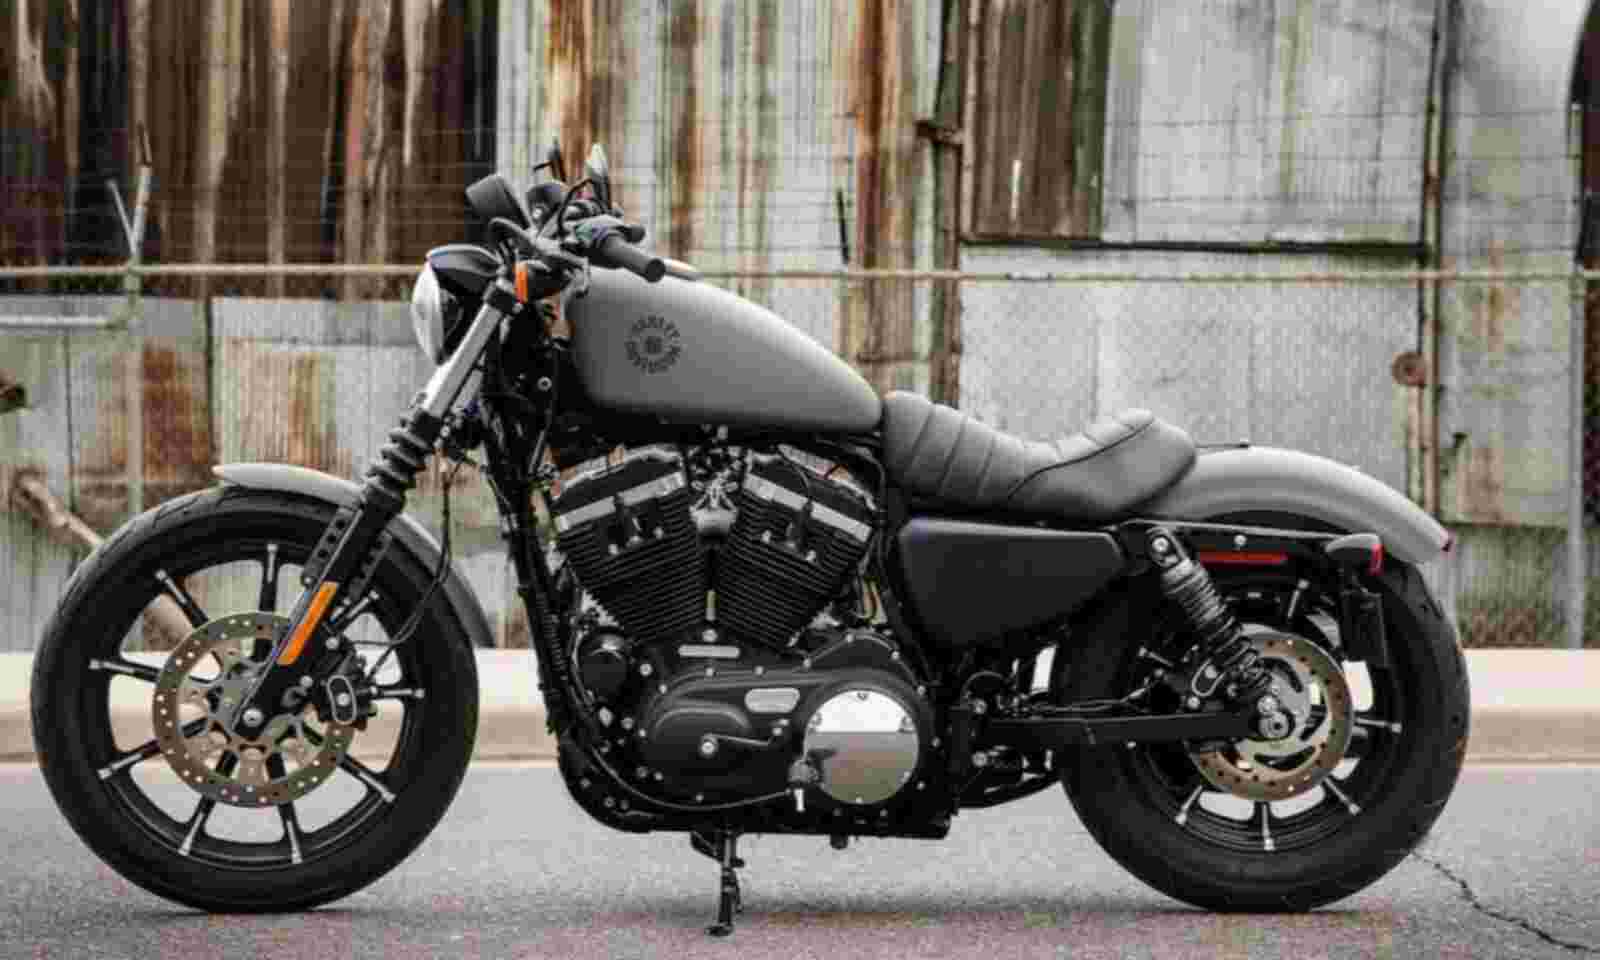 Harley Davidson 1st Batch Sold In India Booking For 2nd Batch Open